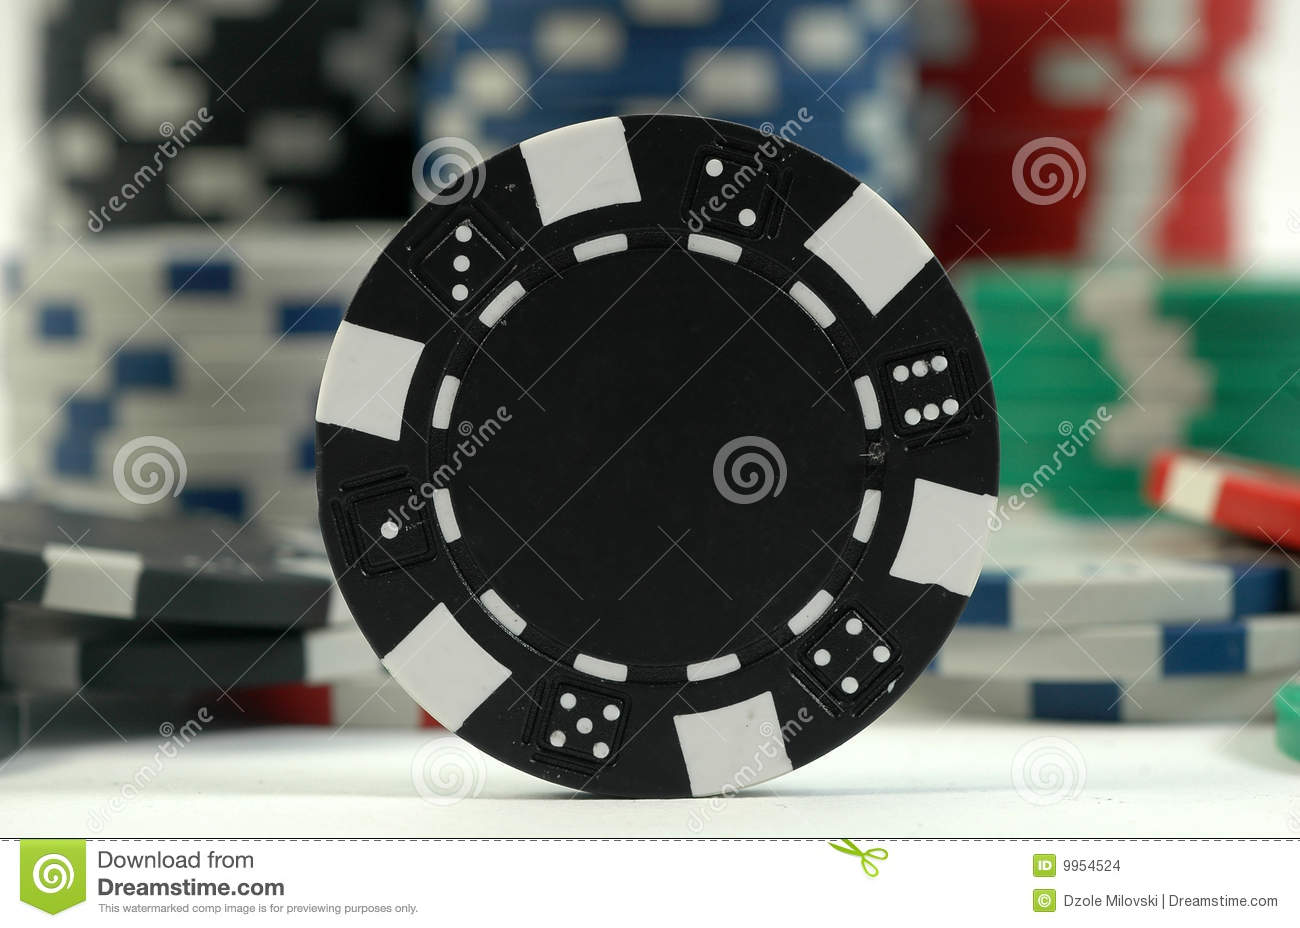 Focus On The Black Poker Chip With Various Chips In The Background